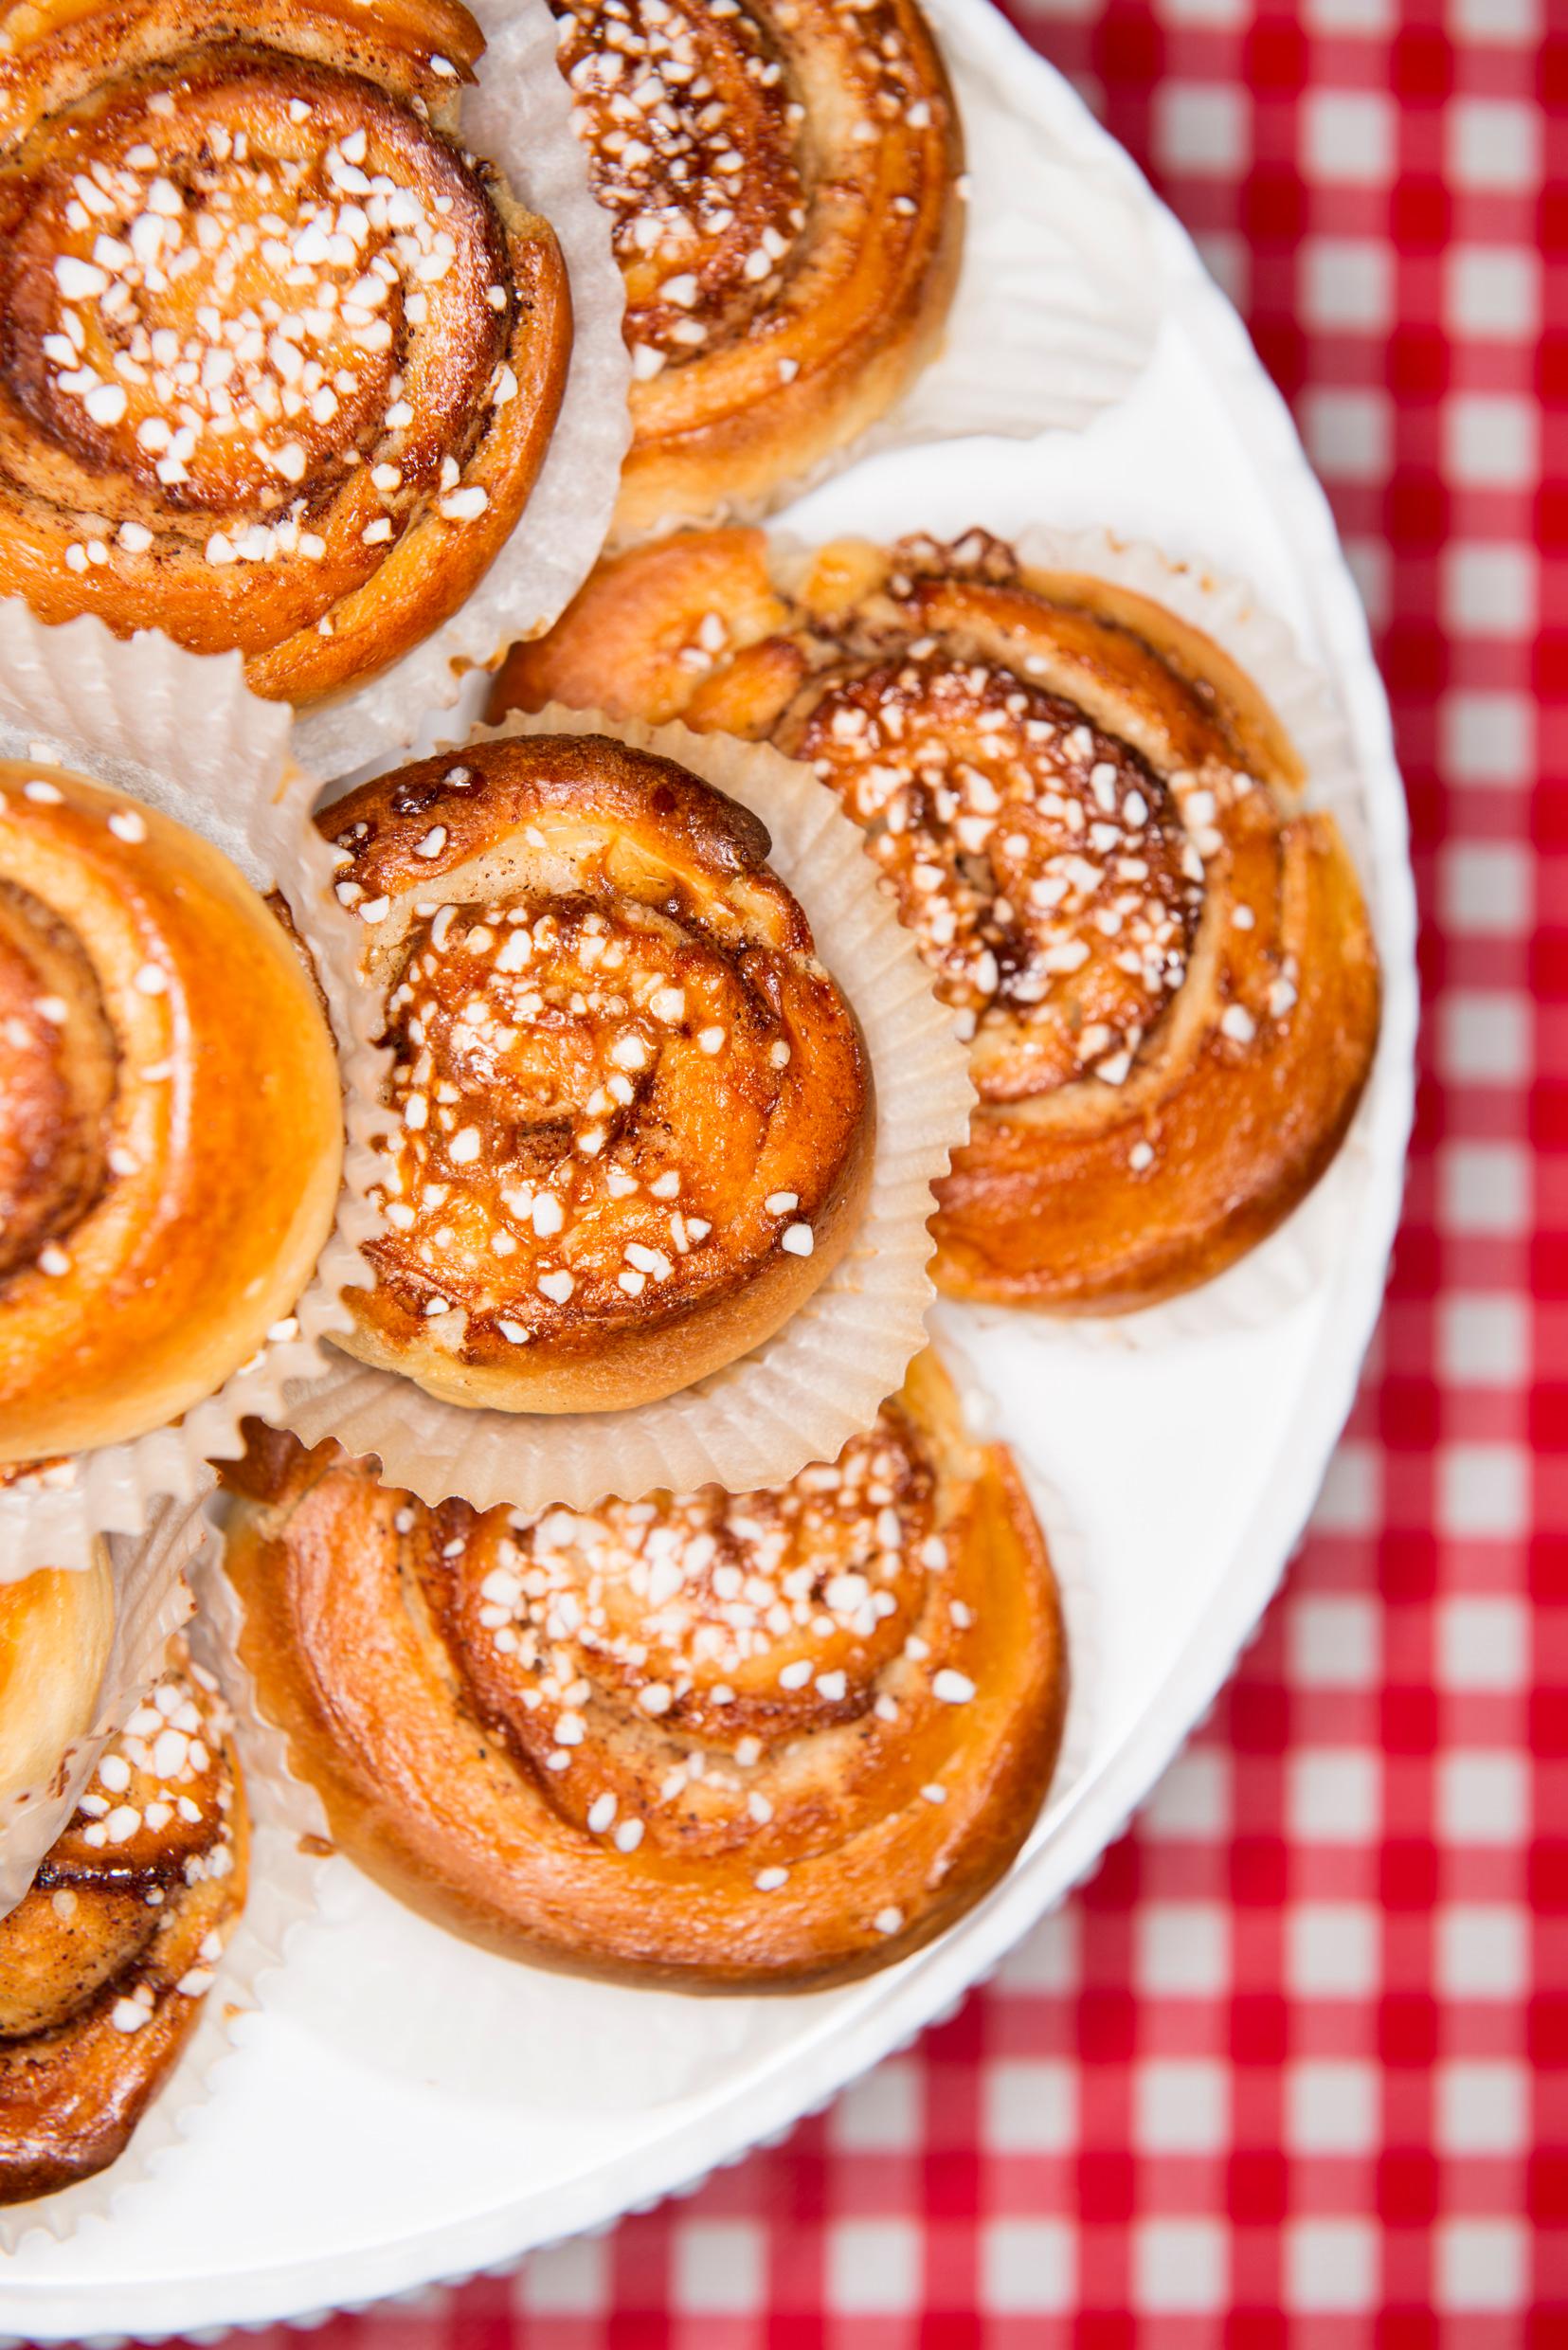 Seen from above, a plate filled with cinnamon buns on top of a red and white table cloth.